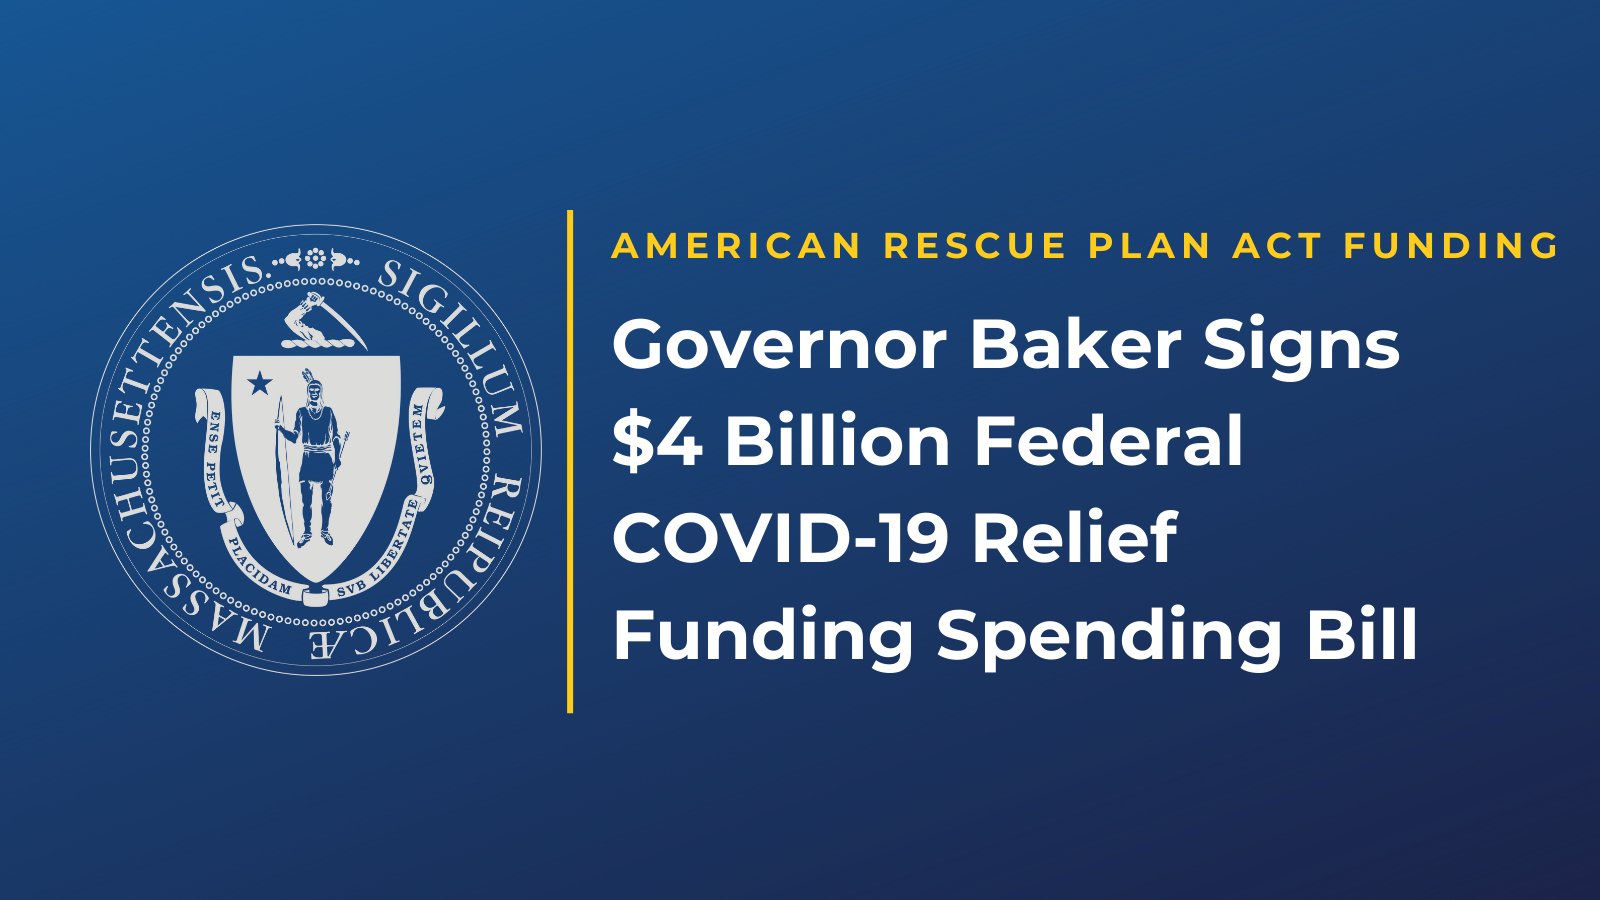 Governor Baker Signs $4 Billion Federal COVID-19 Relief Funding Spending Bill